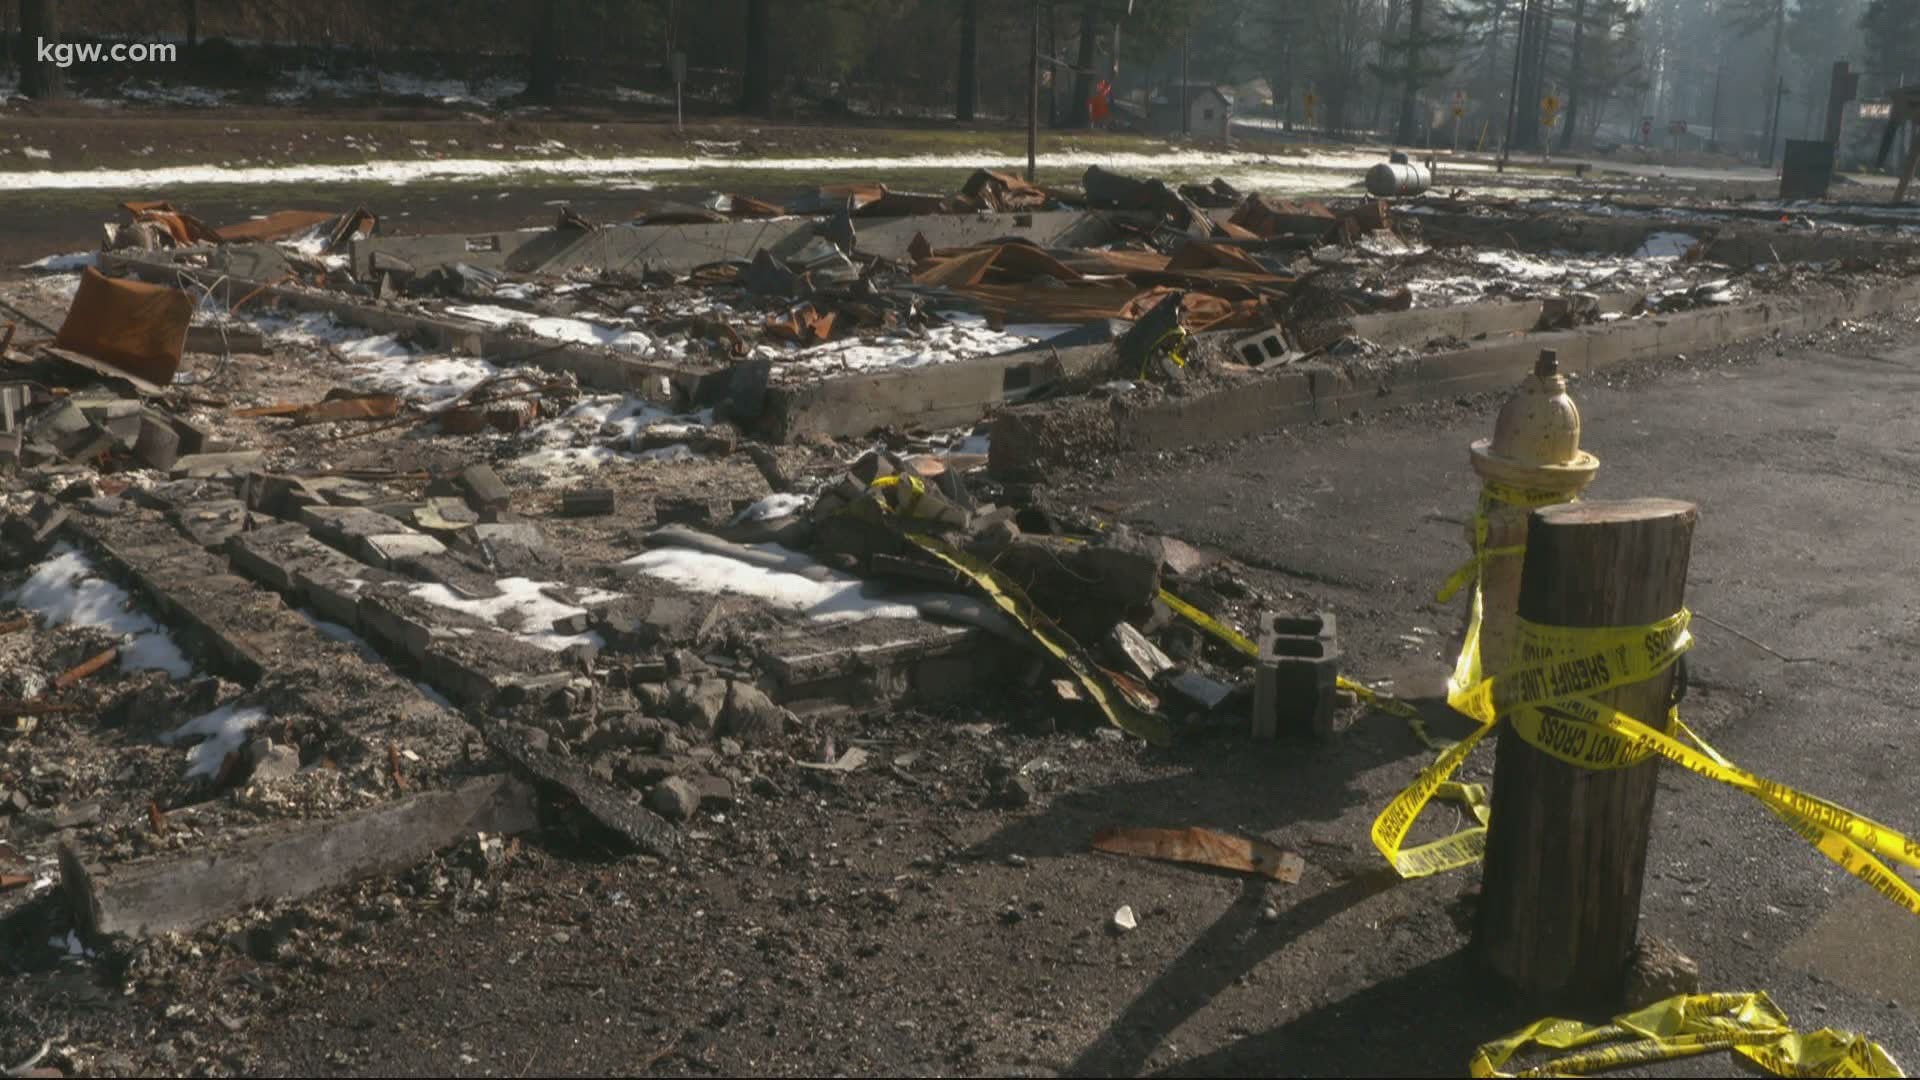 Detroit, Oregon was forever changed this past summer when wildfires destroyed dozens of homes and businesses. Joe Raineri has the latest on Detroit’s recovery